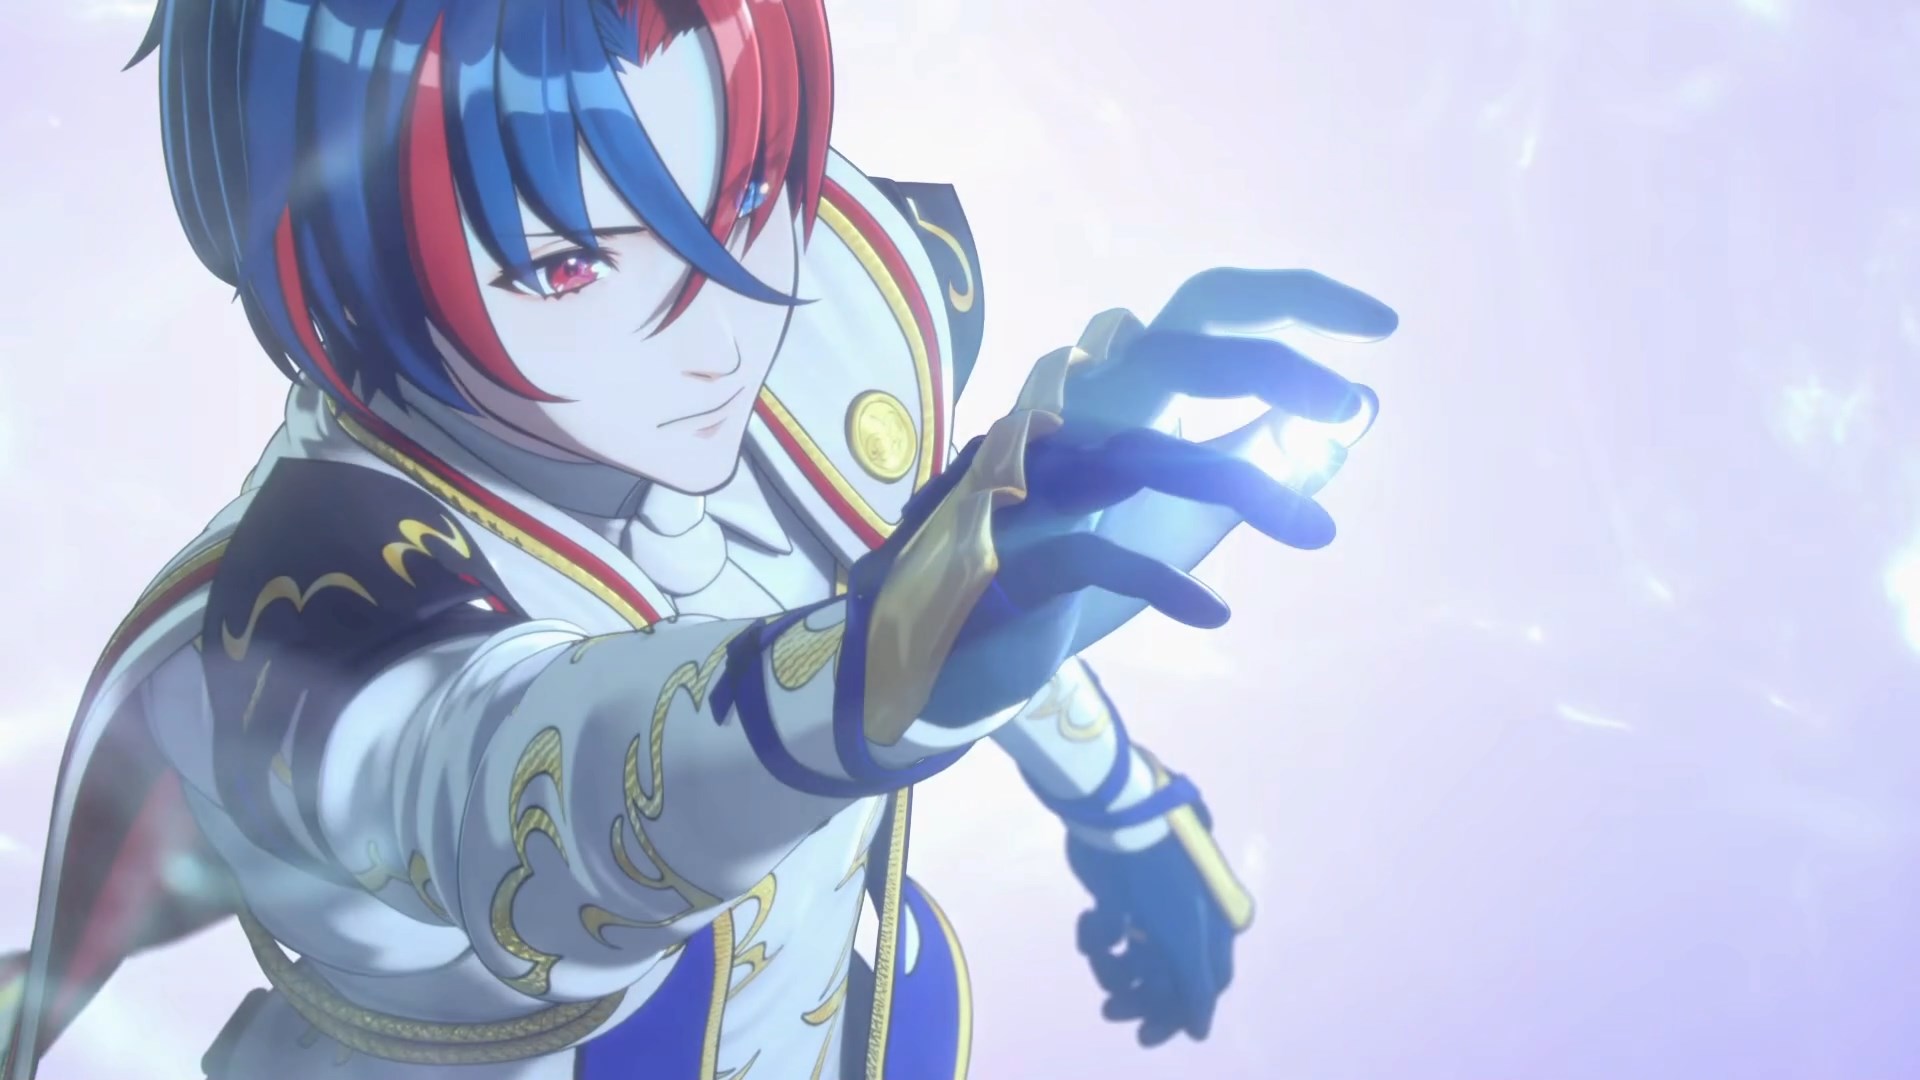 Boy with red and blue hair reaching for a glowing ring in front of them